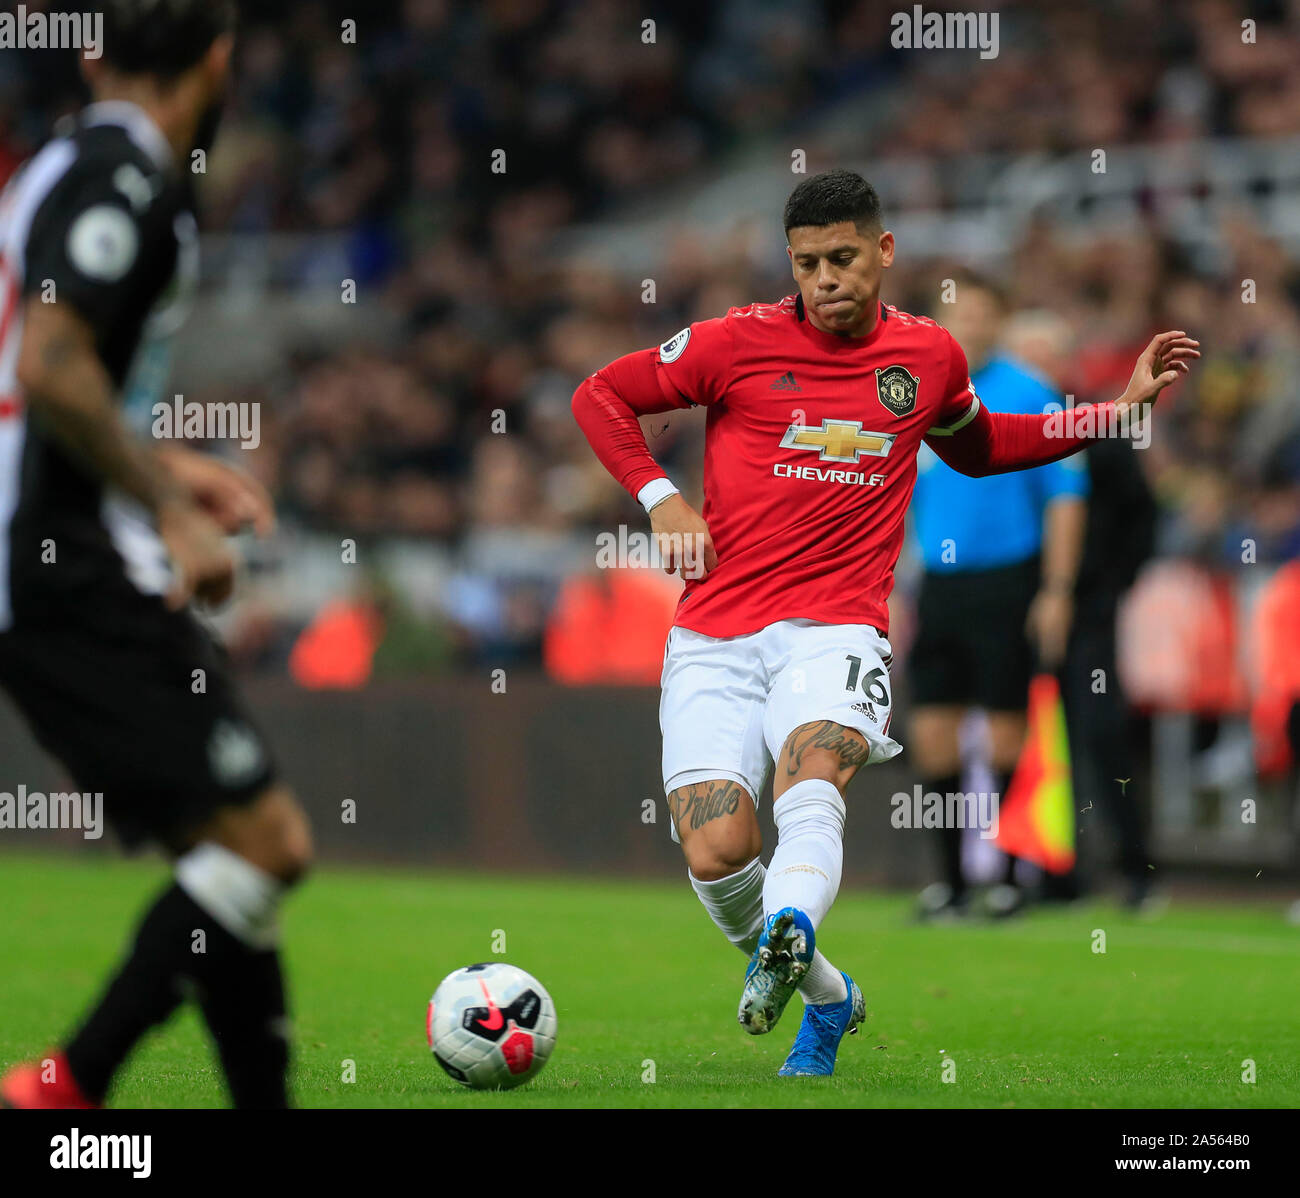 6th October 2019, St. James's Park, Newcastle, England; Premier League, Newcastle United v Manchester United : Marcos Rojo (16) of Manchester United passes the ball Credit: Conor Molloy/News Images Stock Photo